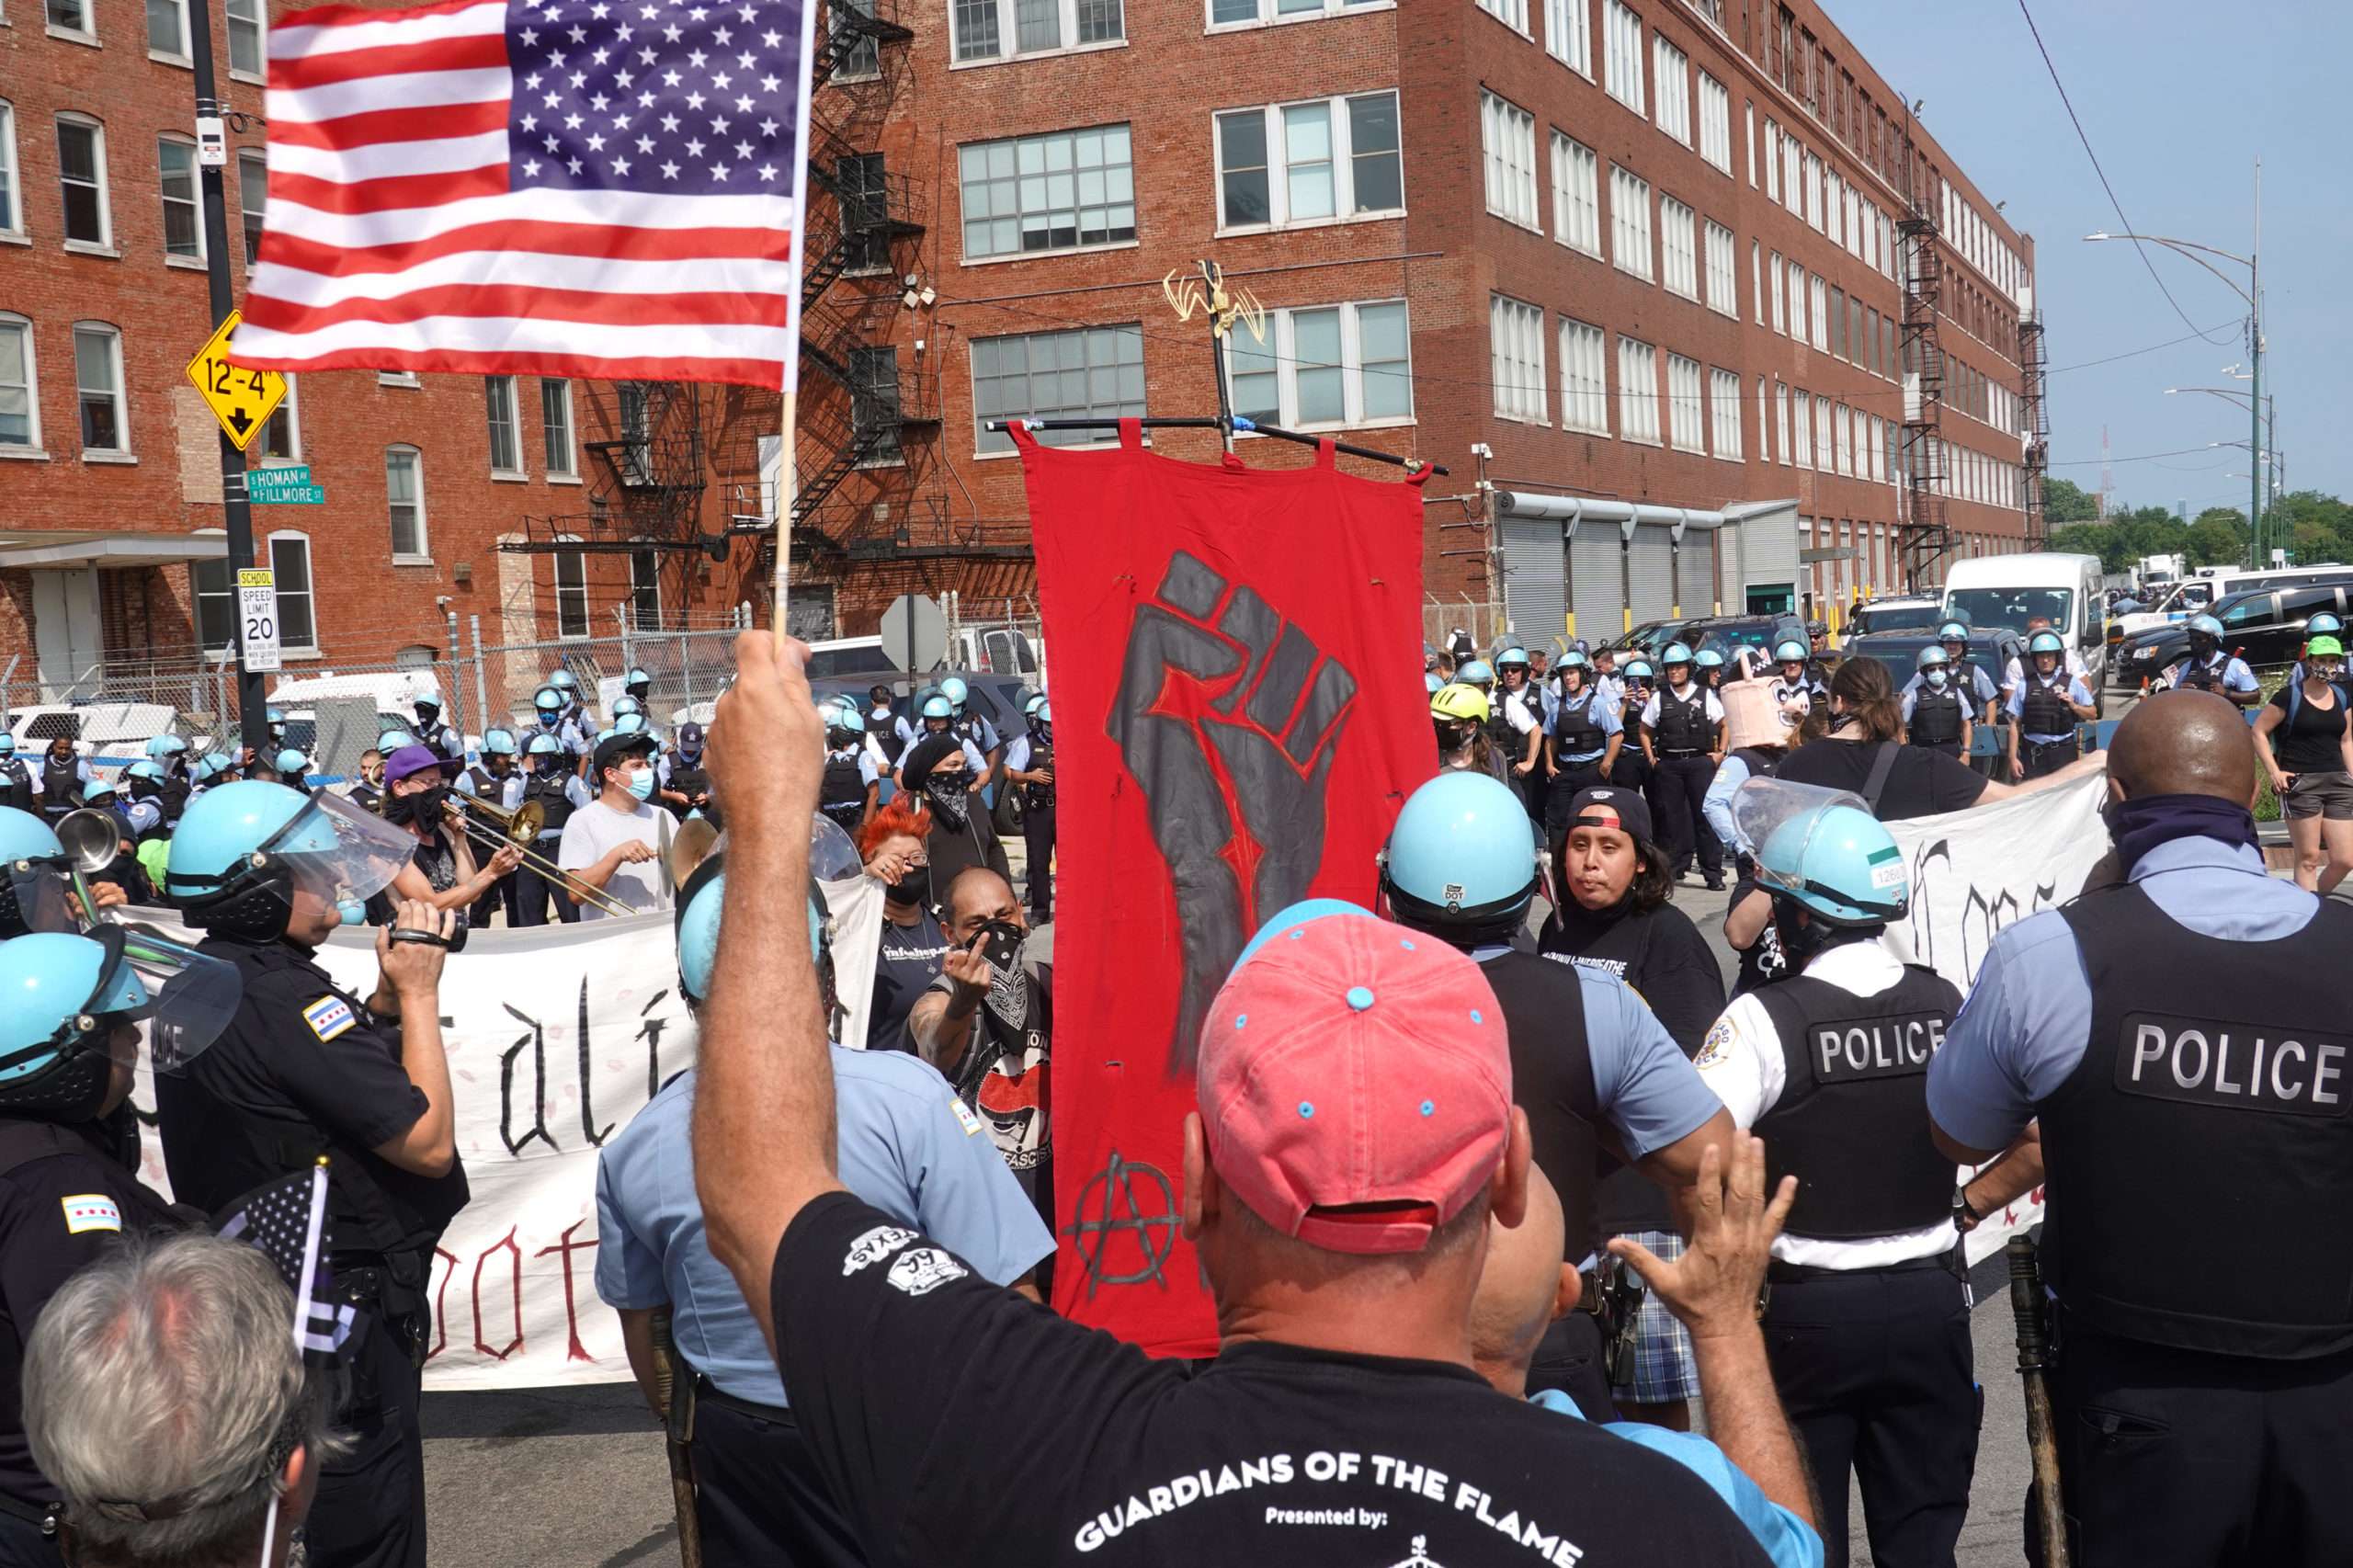 Police separate pro and anti police demonstrators during a protest on August 15, 2020 in Chicago, Illinois. The demonstration was one of several in the city today, either in support of or in opposition to police. (Photo by Scott Olson/Getty Images)